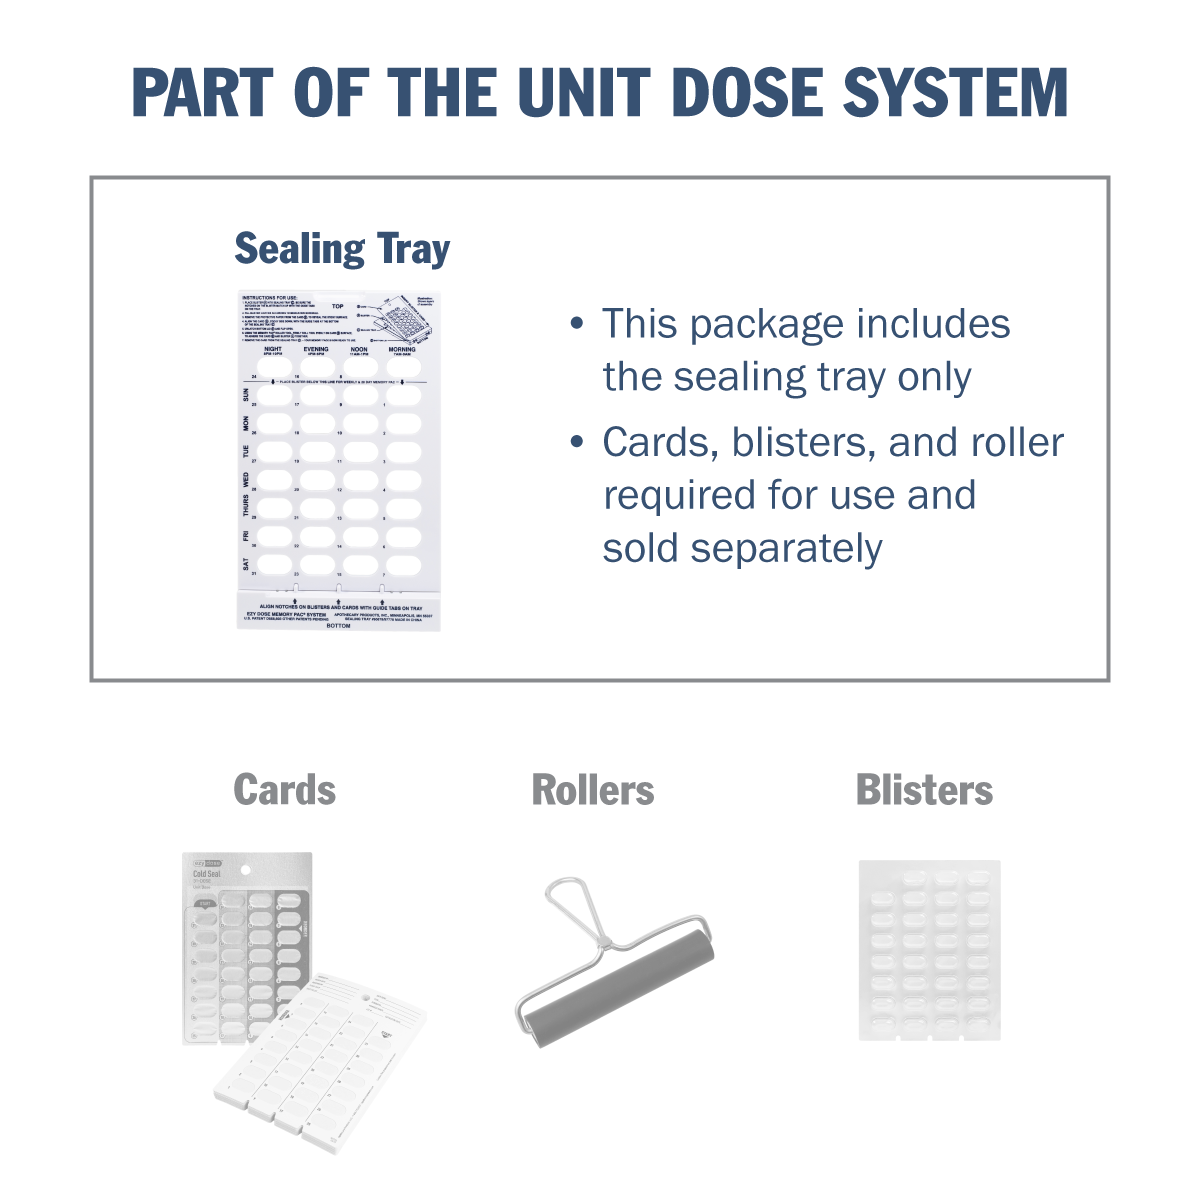 Cold Seal Tray is part of the unit dose system, includes sealing tray only